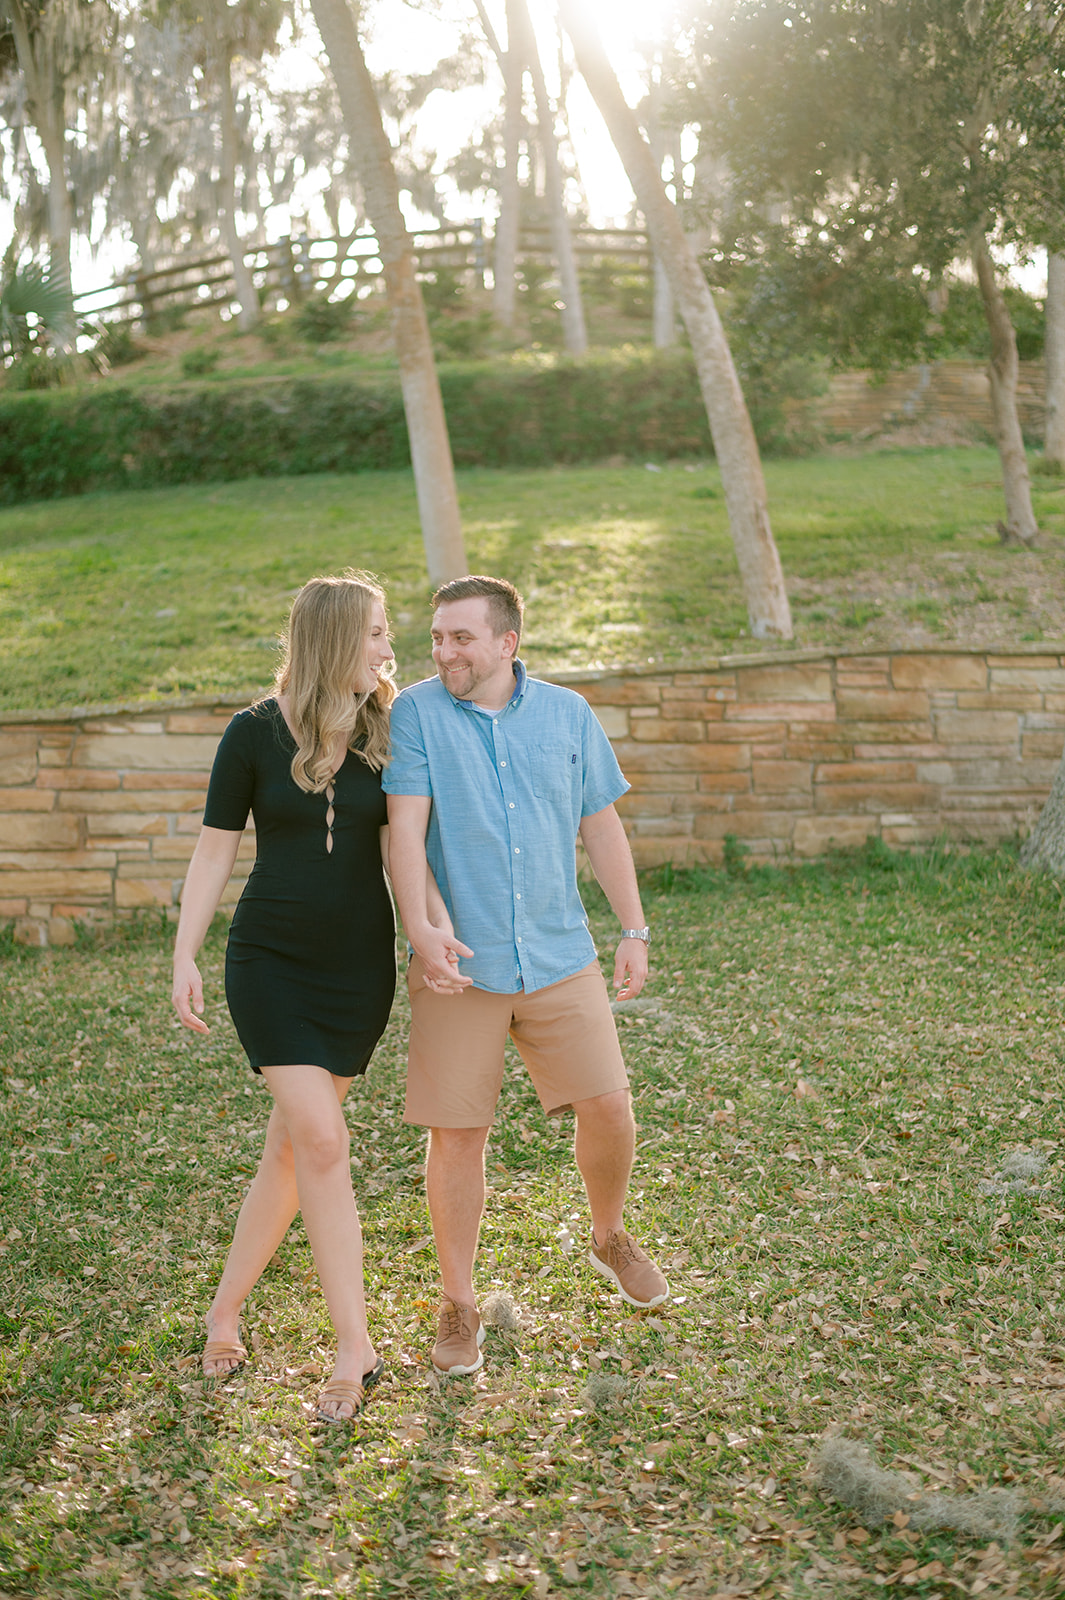 "Dreamy engagement photo session in the heart of Tampa, Florida"
